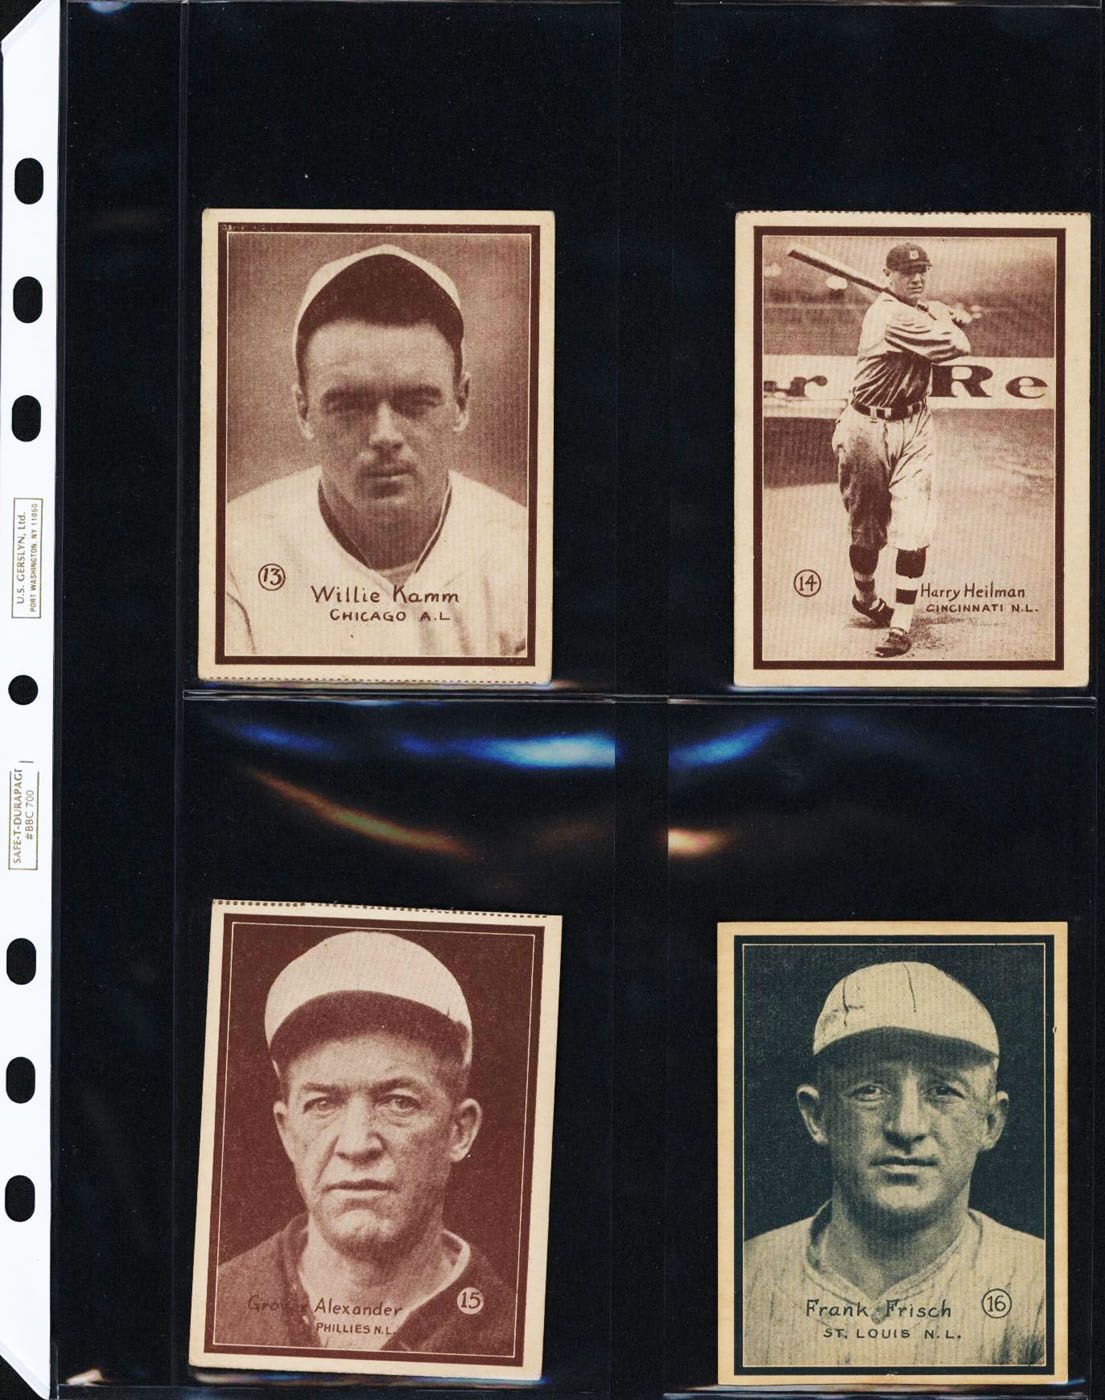 Comprises 54 total cards including Babe Ruth, Lou Gehrig, 35 Hall of